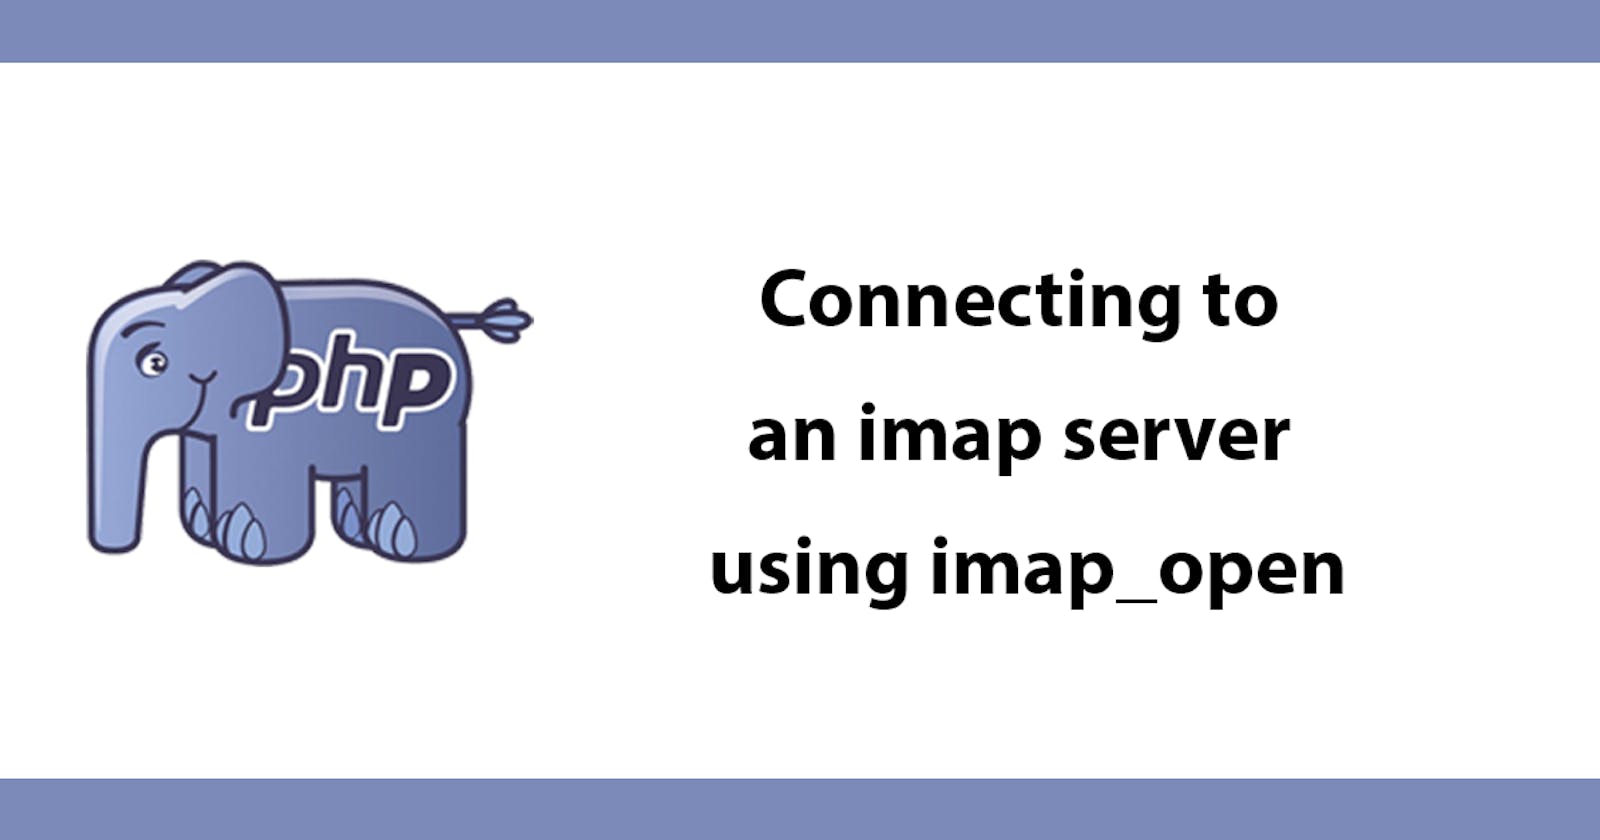 Connecting to an imap server using imap_open